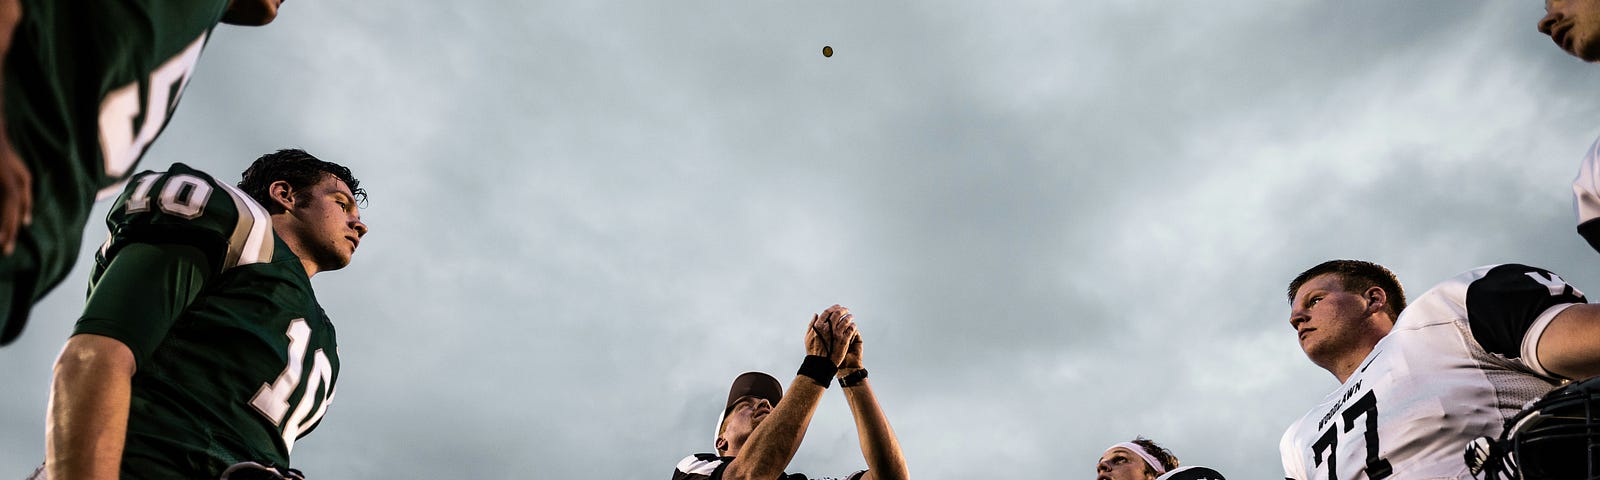 American football referee tosses a coin.